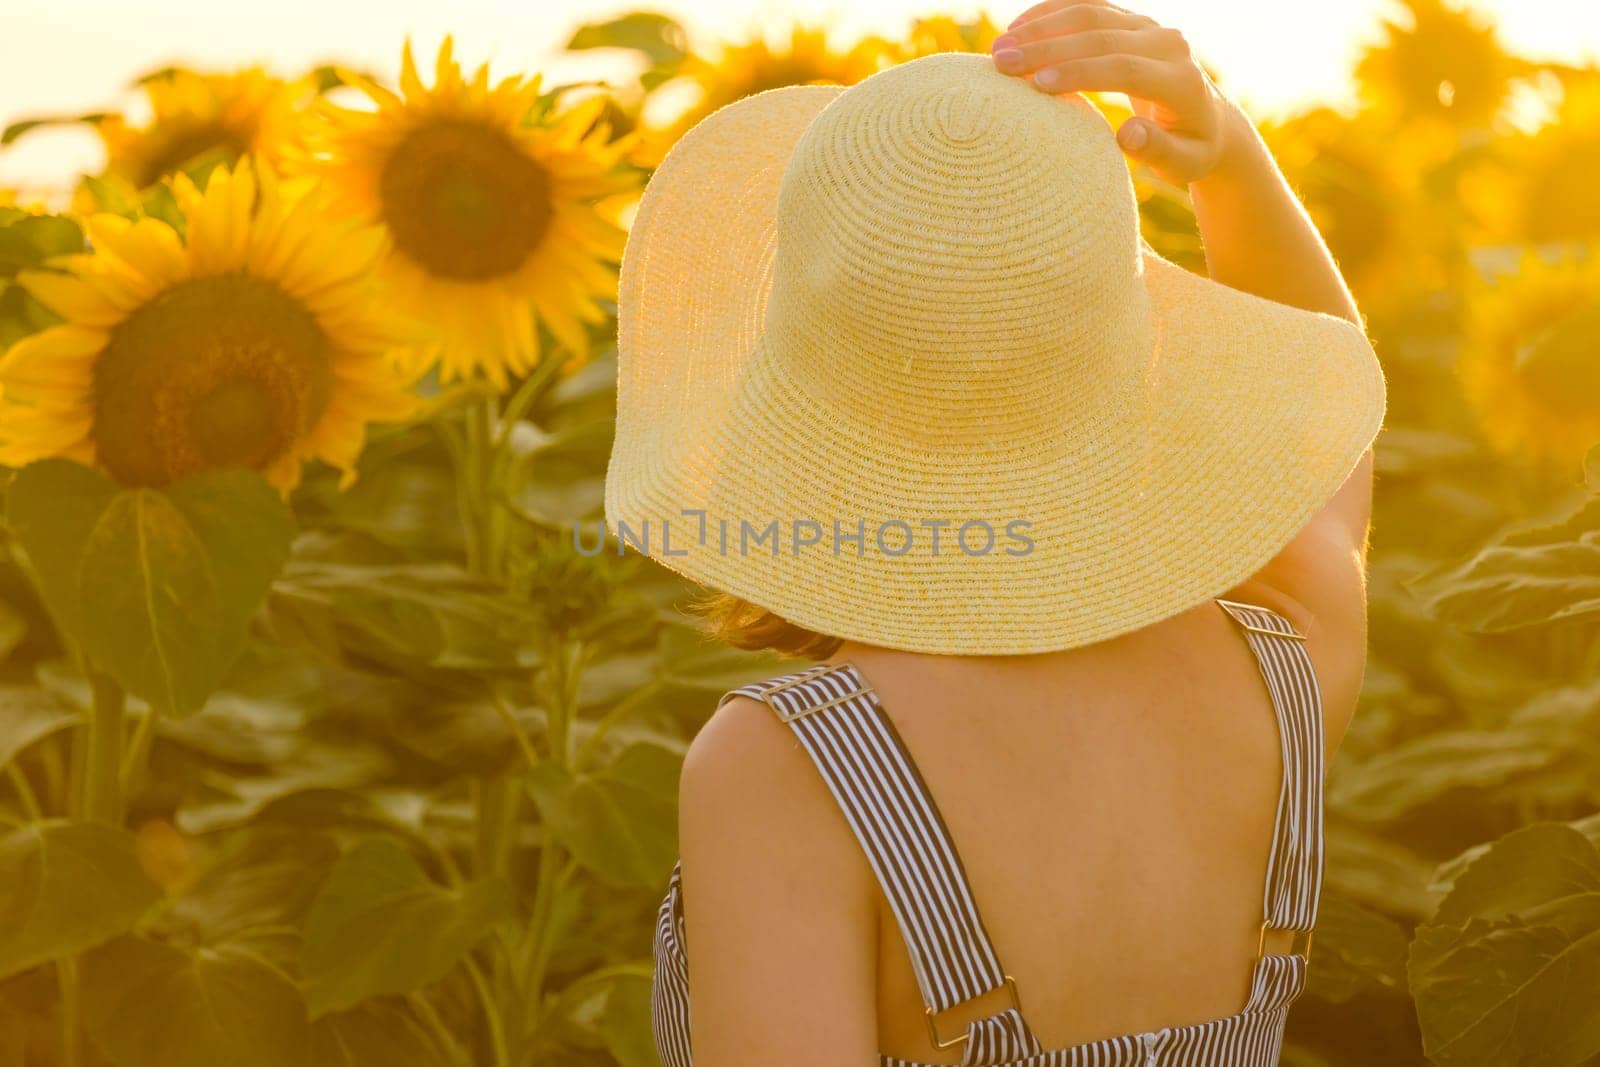 Young woman looks at bright sunflowers growing in rural field at sunset. Lady in straw hat stands among beautiful plants backside close view